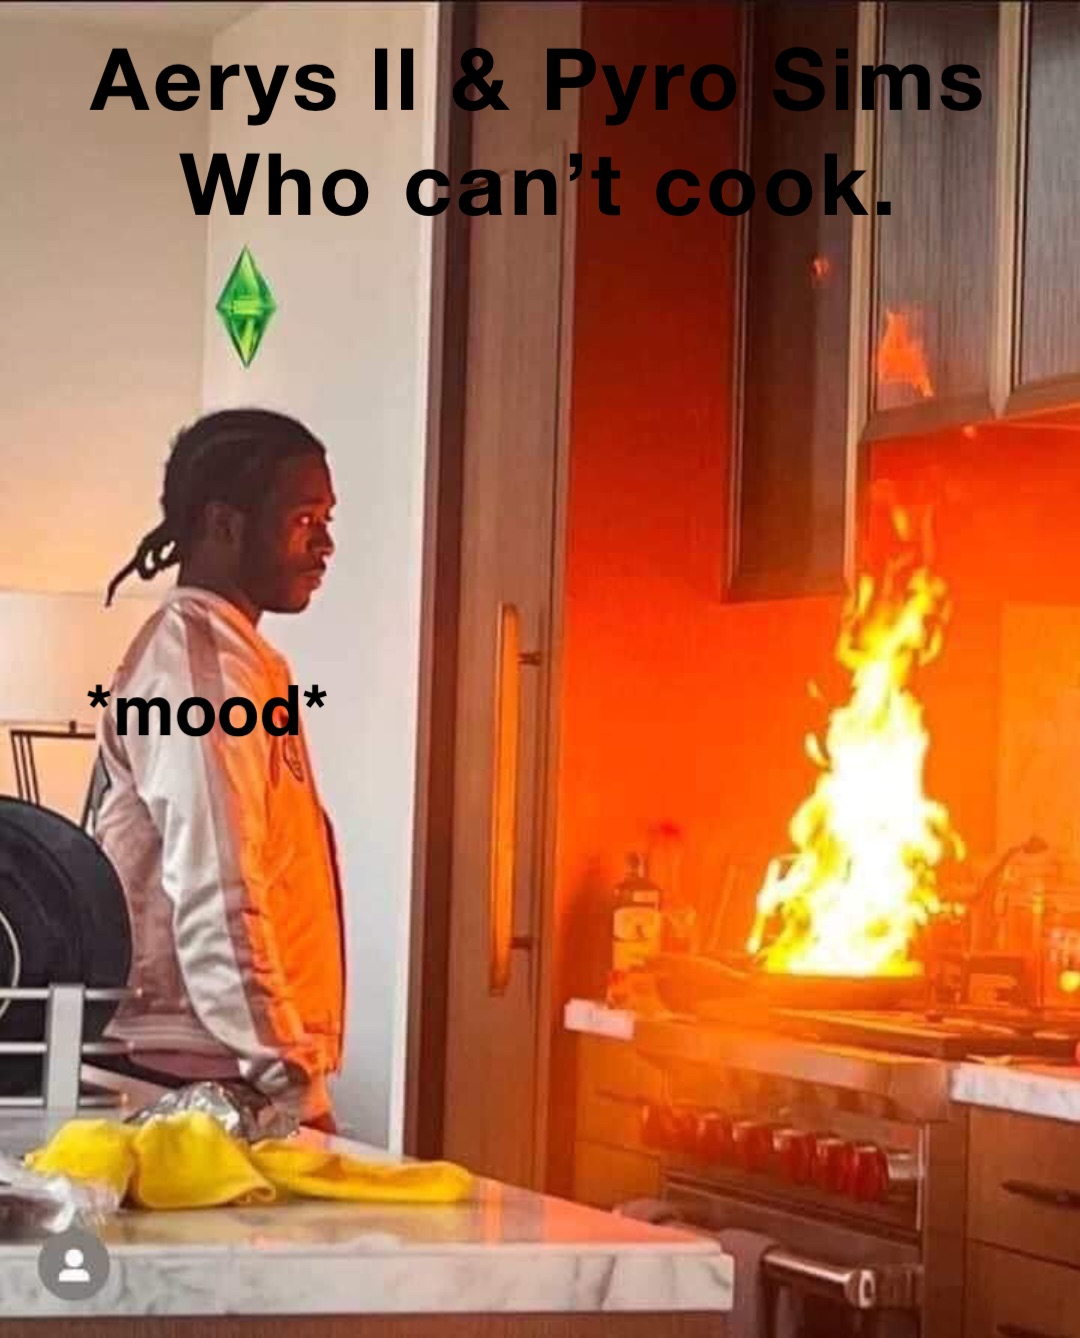 Aerys ll & Pyro Sims
Who can’t cook. *mood*